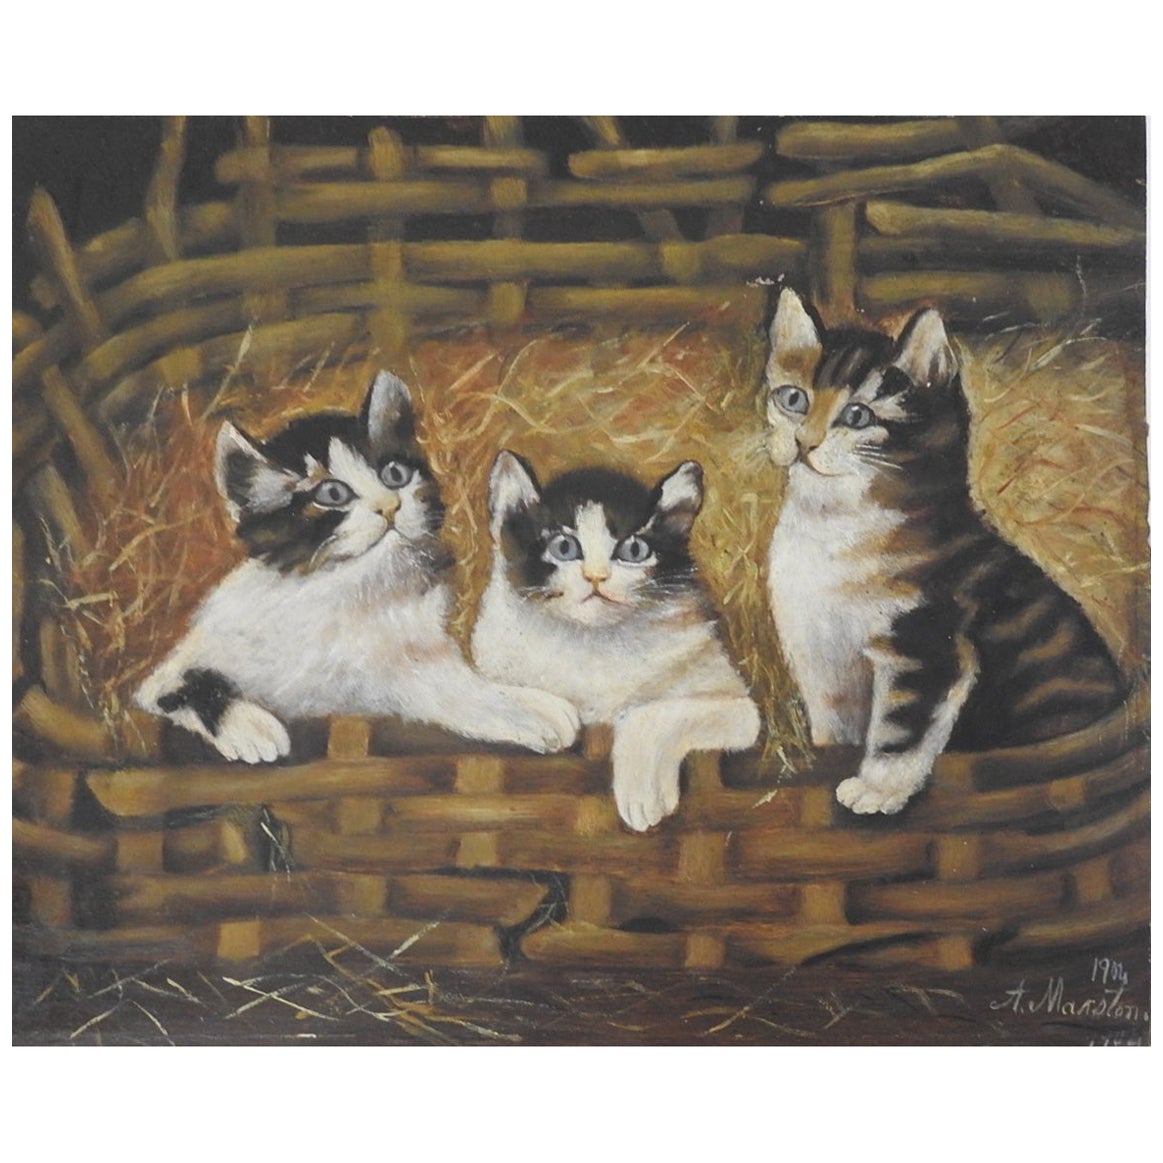 1904 Folk Art Cats Kittens in Basket Painting For Sale